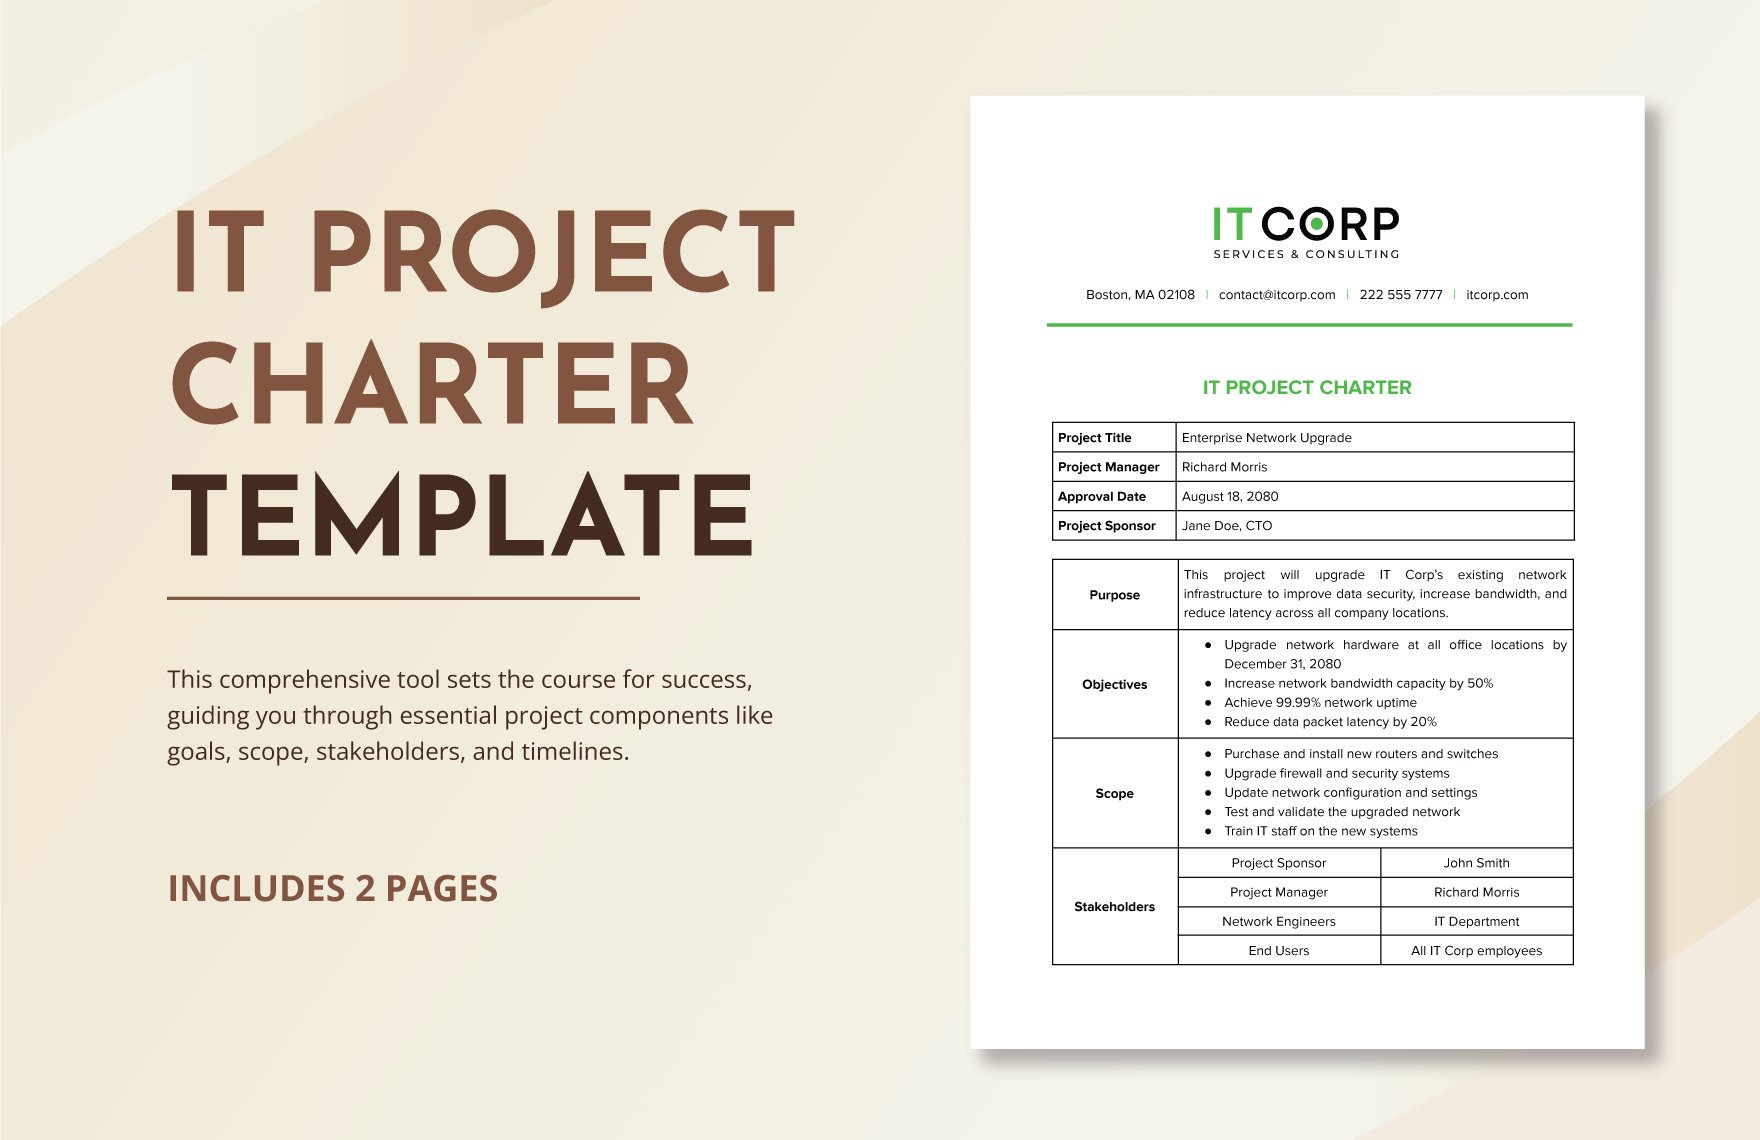 IT Project Charter Template